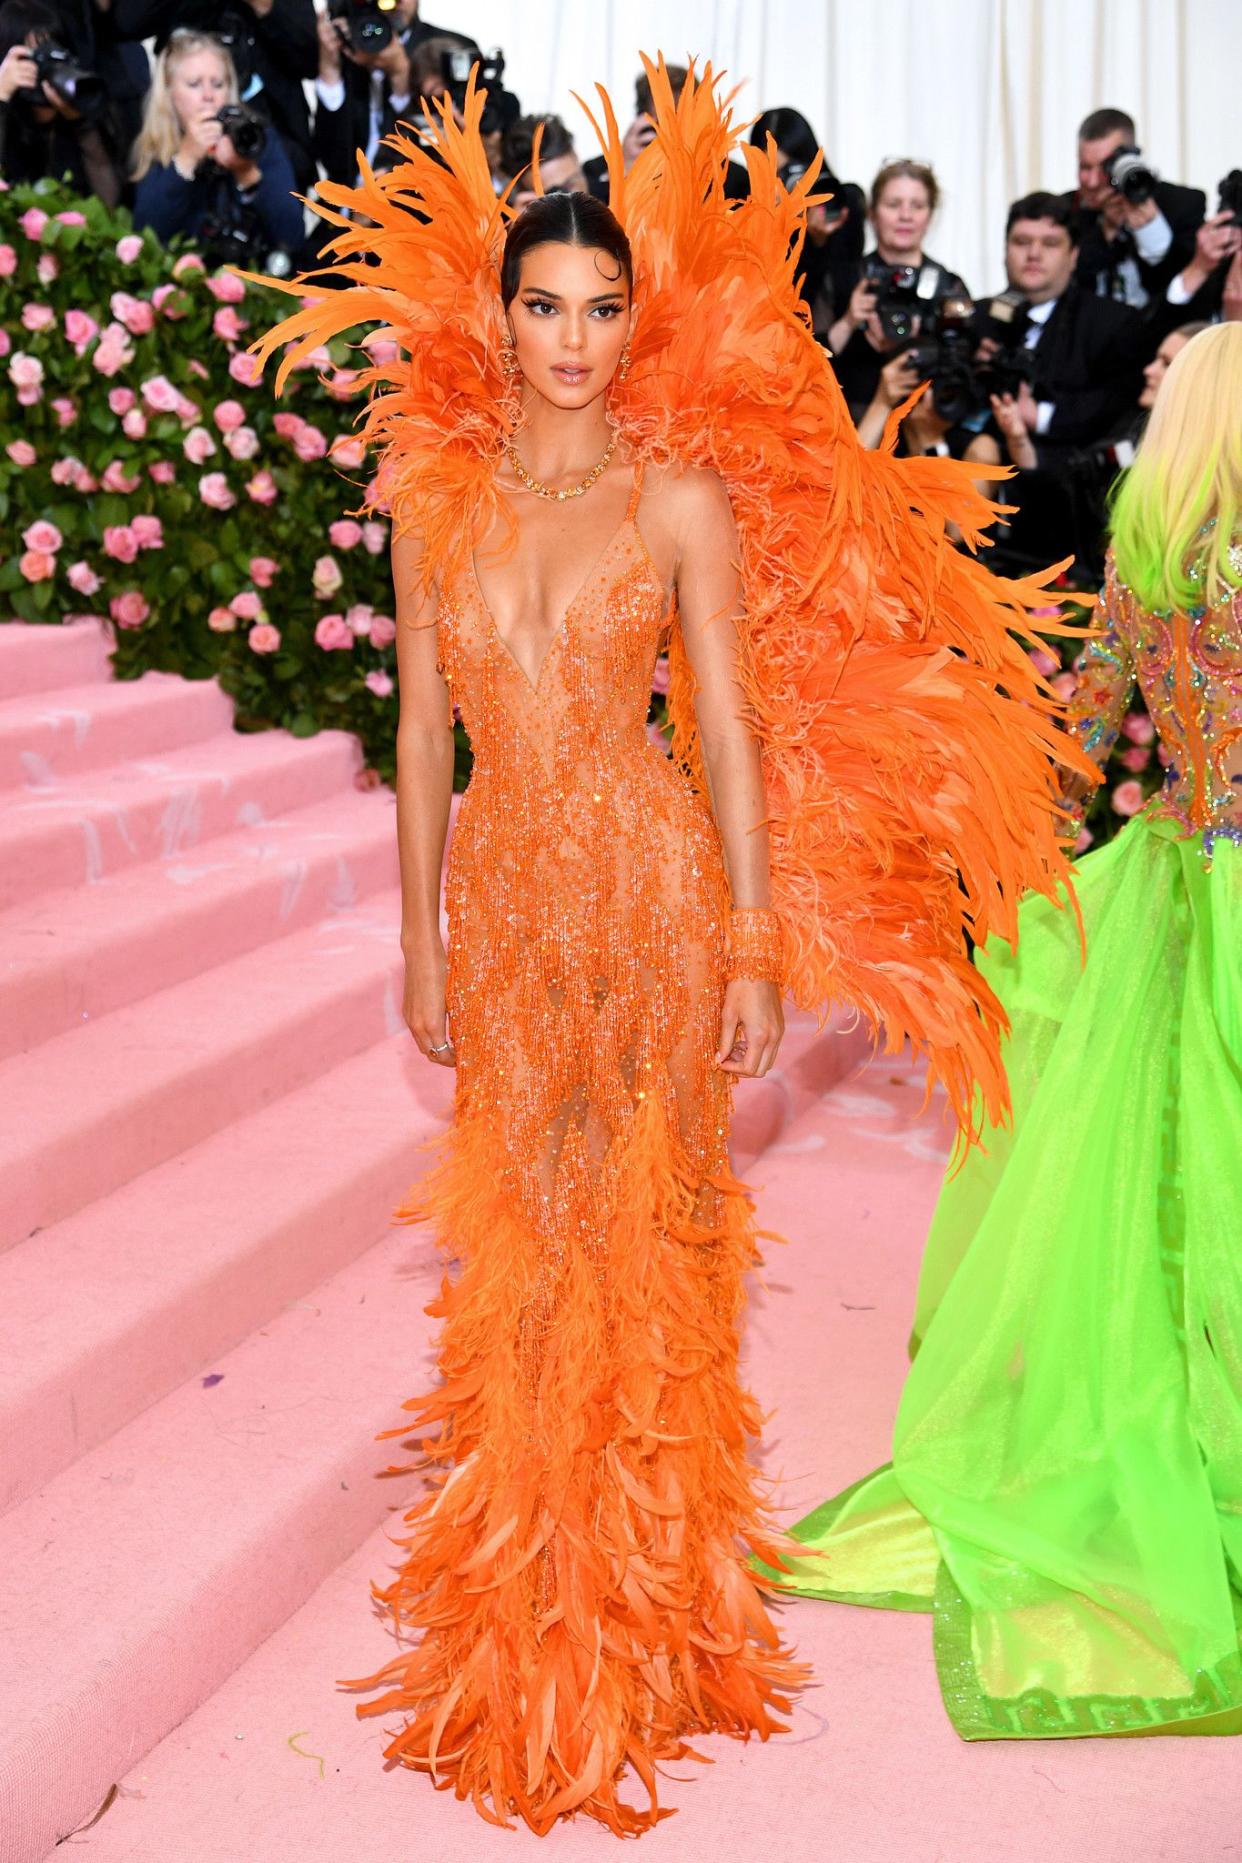 Kendall Jenner attends The 2019 Met Gala Celebrating Camp: Notes on Fashion at Metropolitan Museum of Art on May 06, 2019 in New York City.